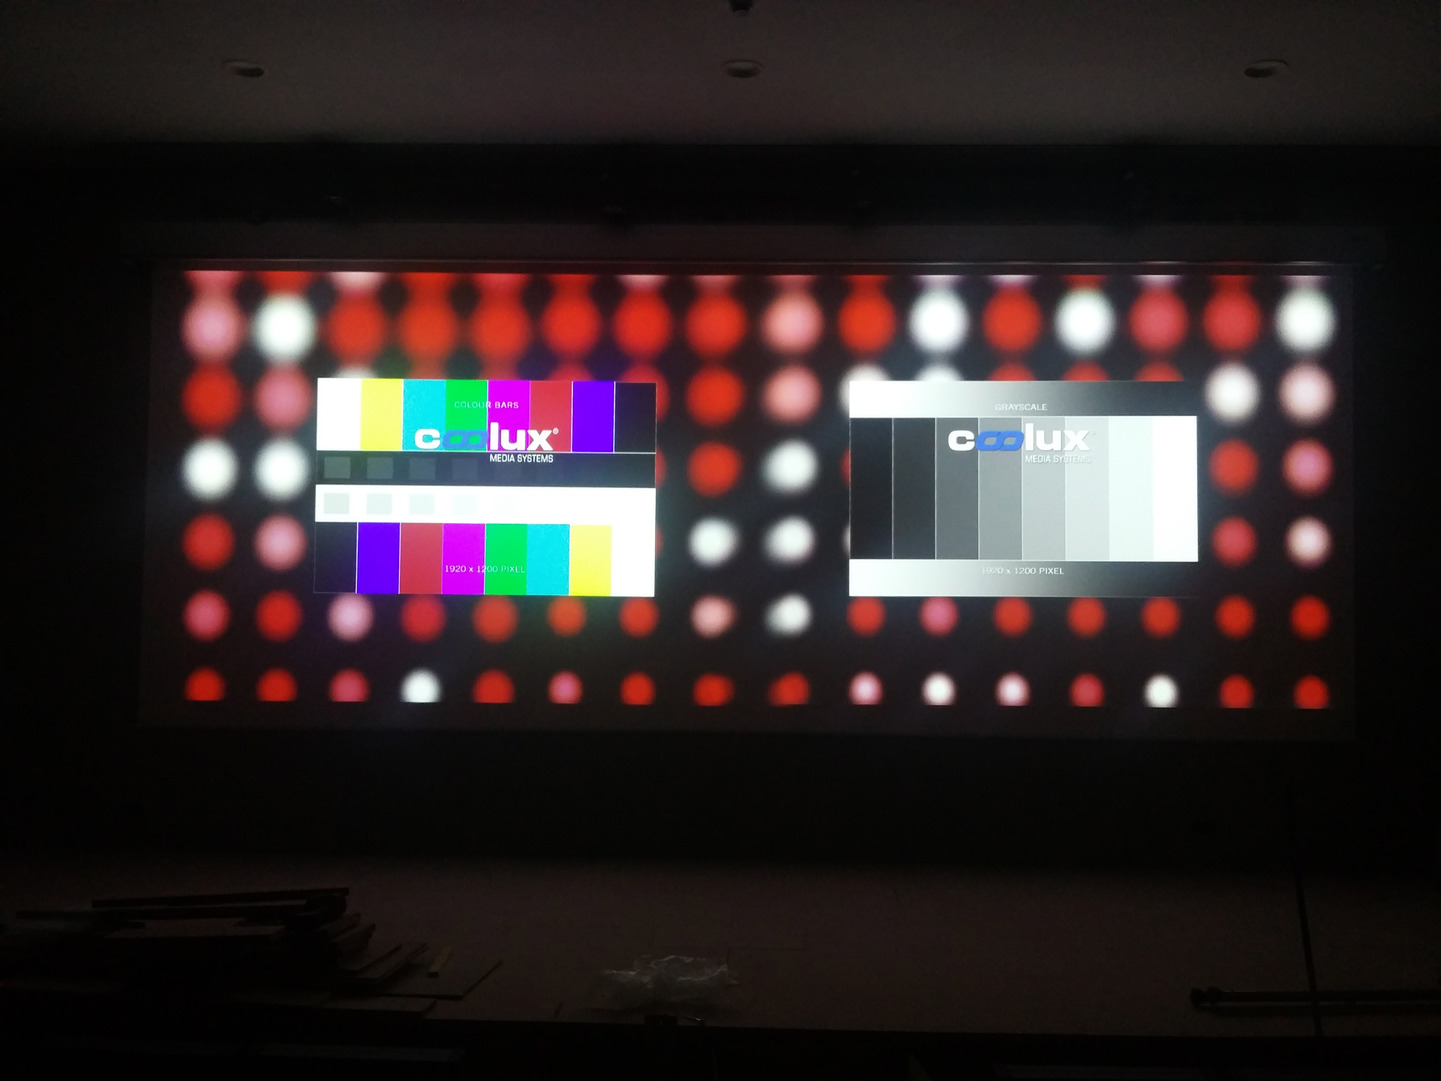 Charmex supplies the latest audiovisual technology to the Josep Carreras Leukemia Research Institute